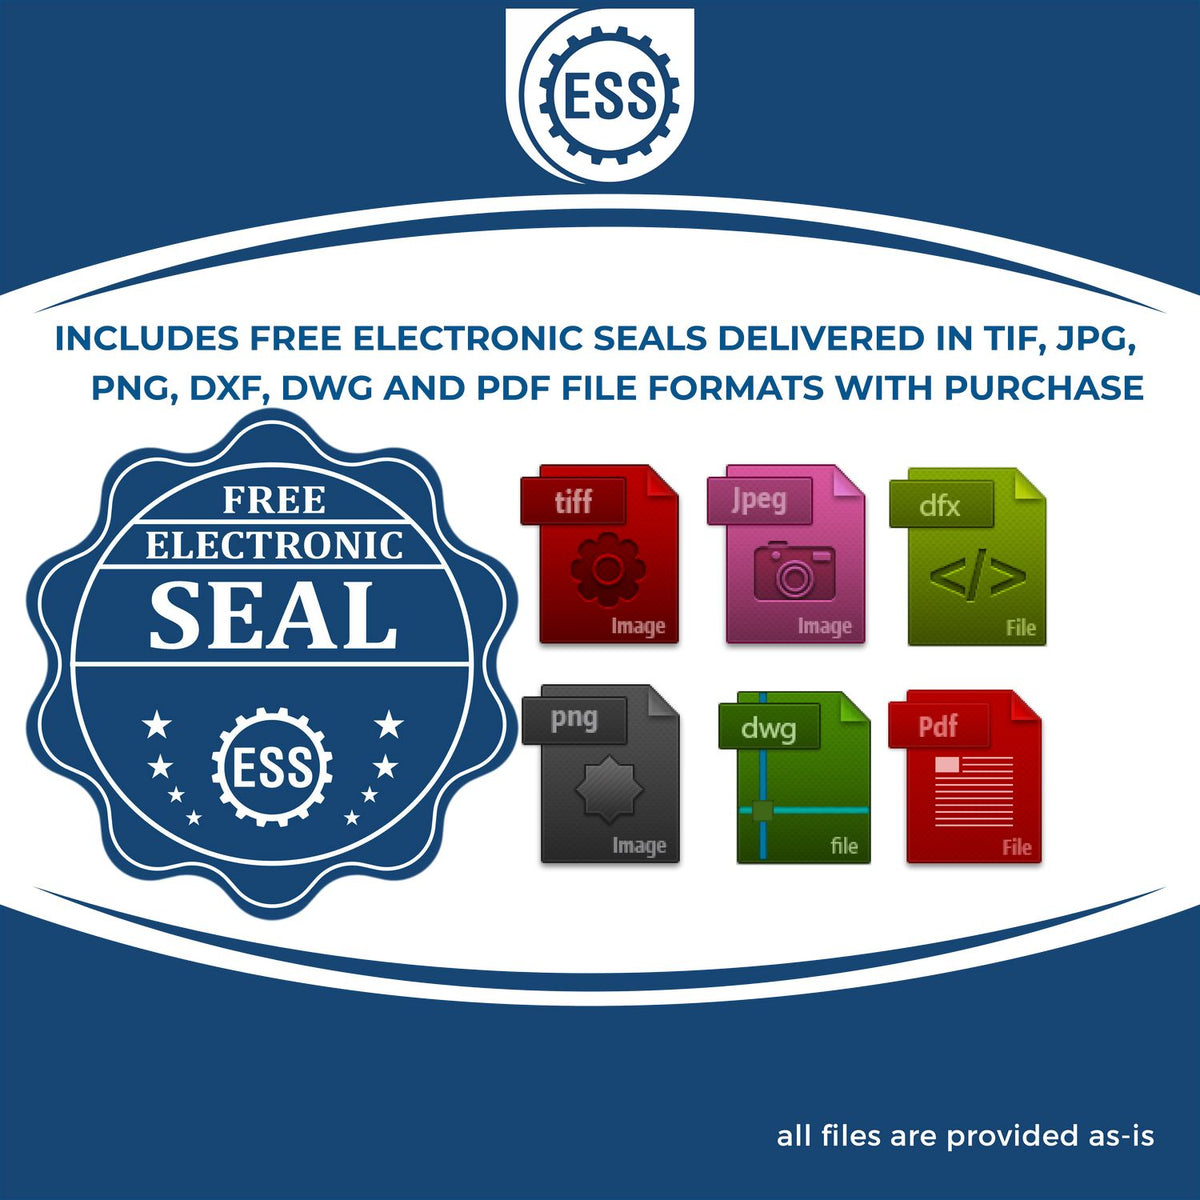 An infographic for the free electronic seal for the Gift Colorado Architect Seal illustrating the different file type icons such as DXF, DWG, TIF, JPG and PNG.